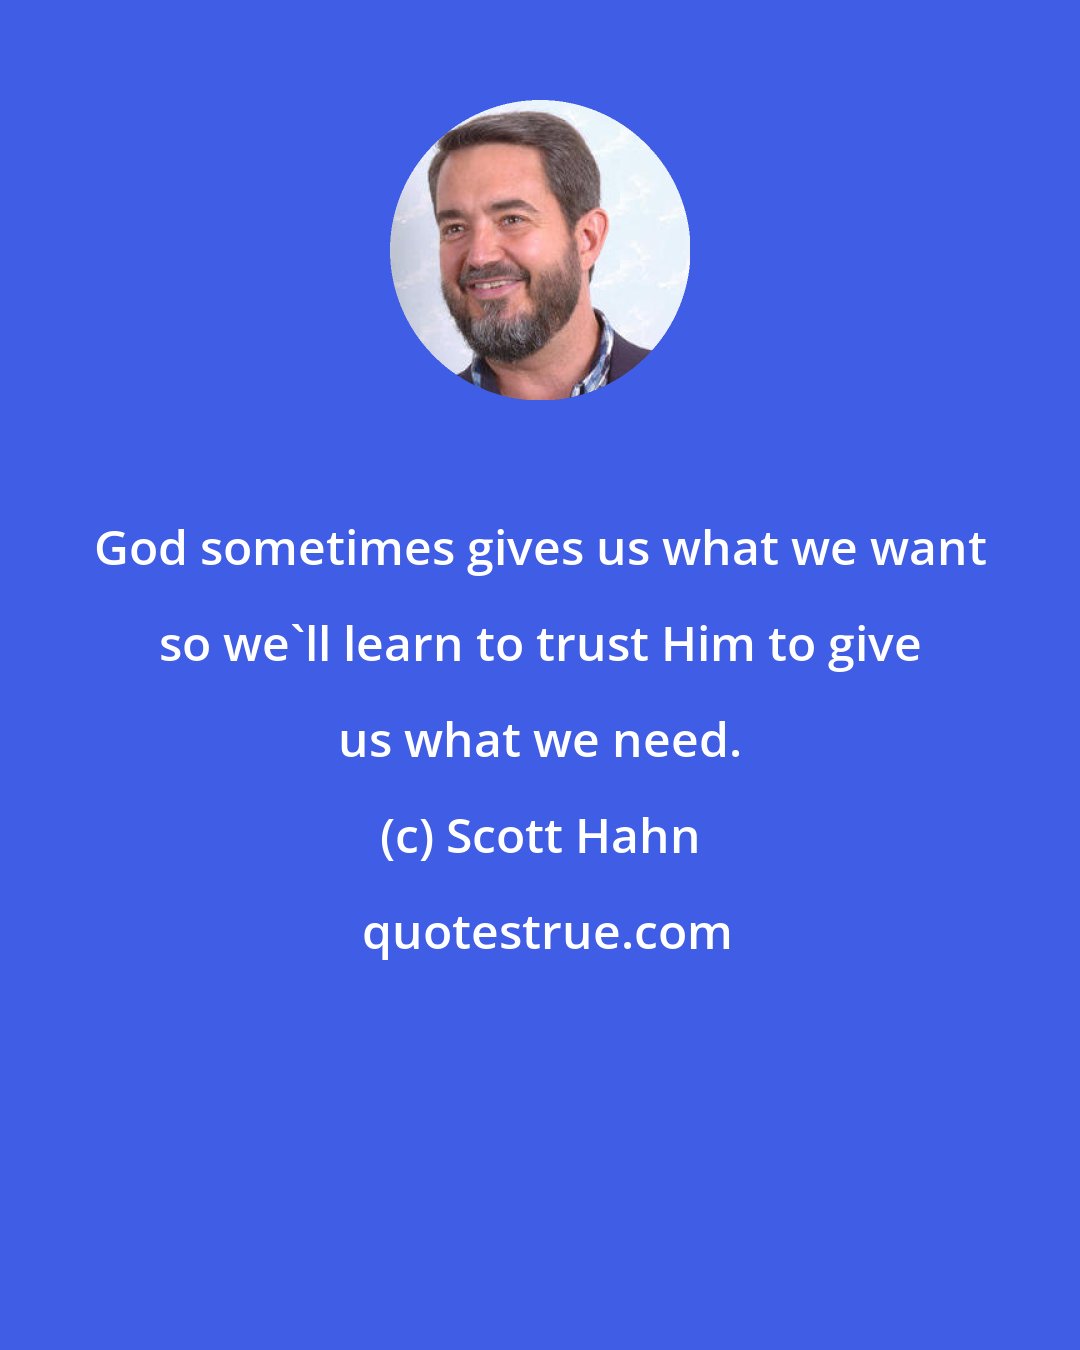 Scott Hahn: God sometimes gives us what we want so we'll learn to trust Him to give us what we need.